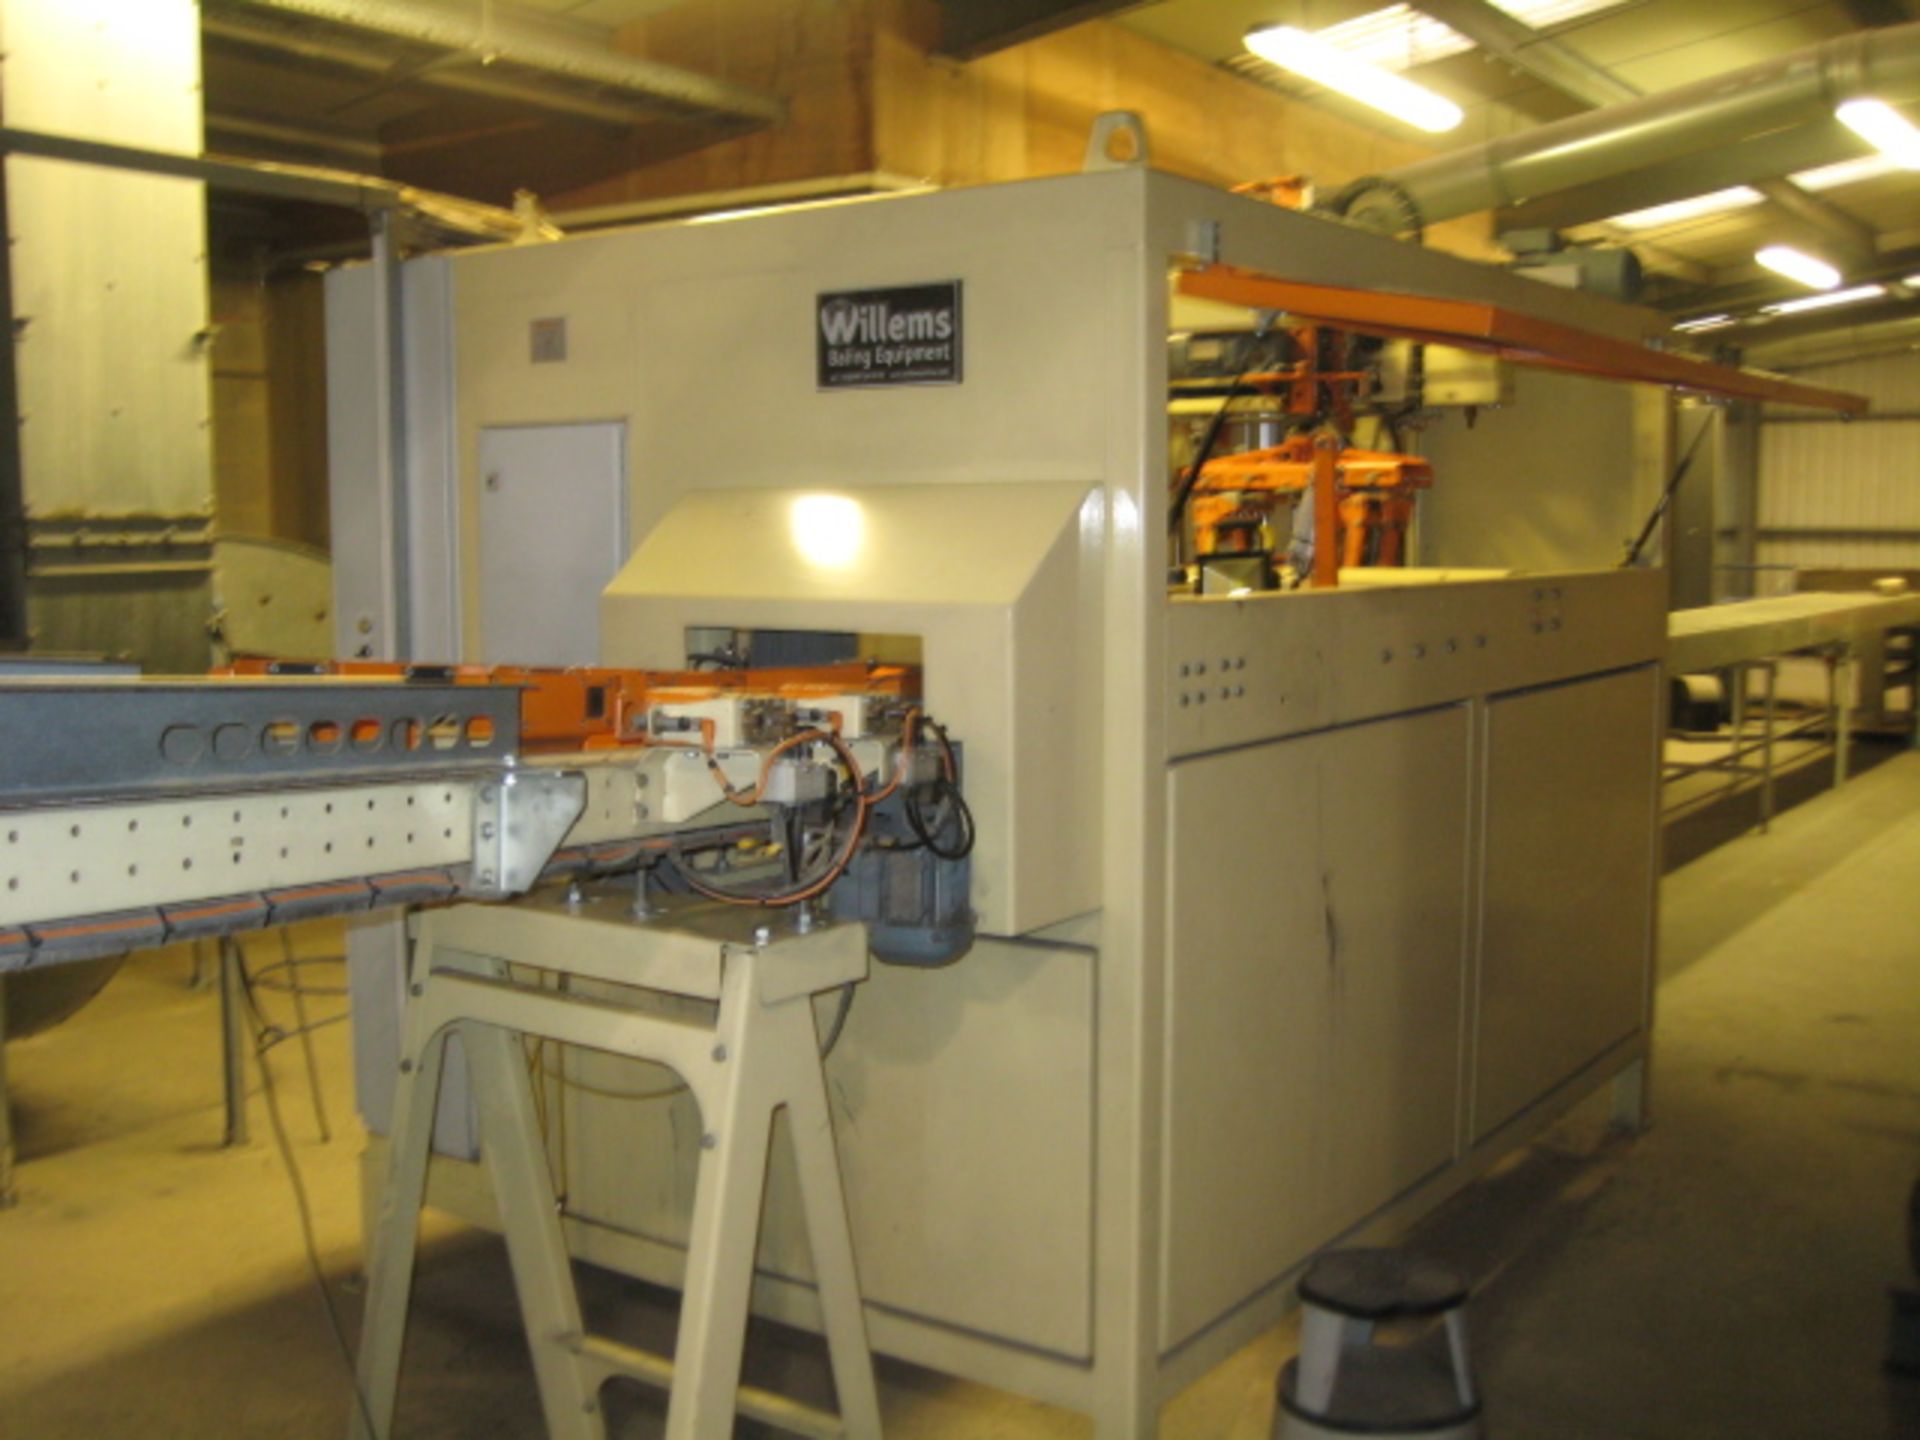 Packaging - Willems small pack bedding baler model BPV-900-VHL1 built 2009. This is a two line - Image 6 of 13